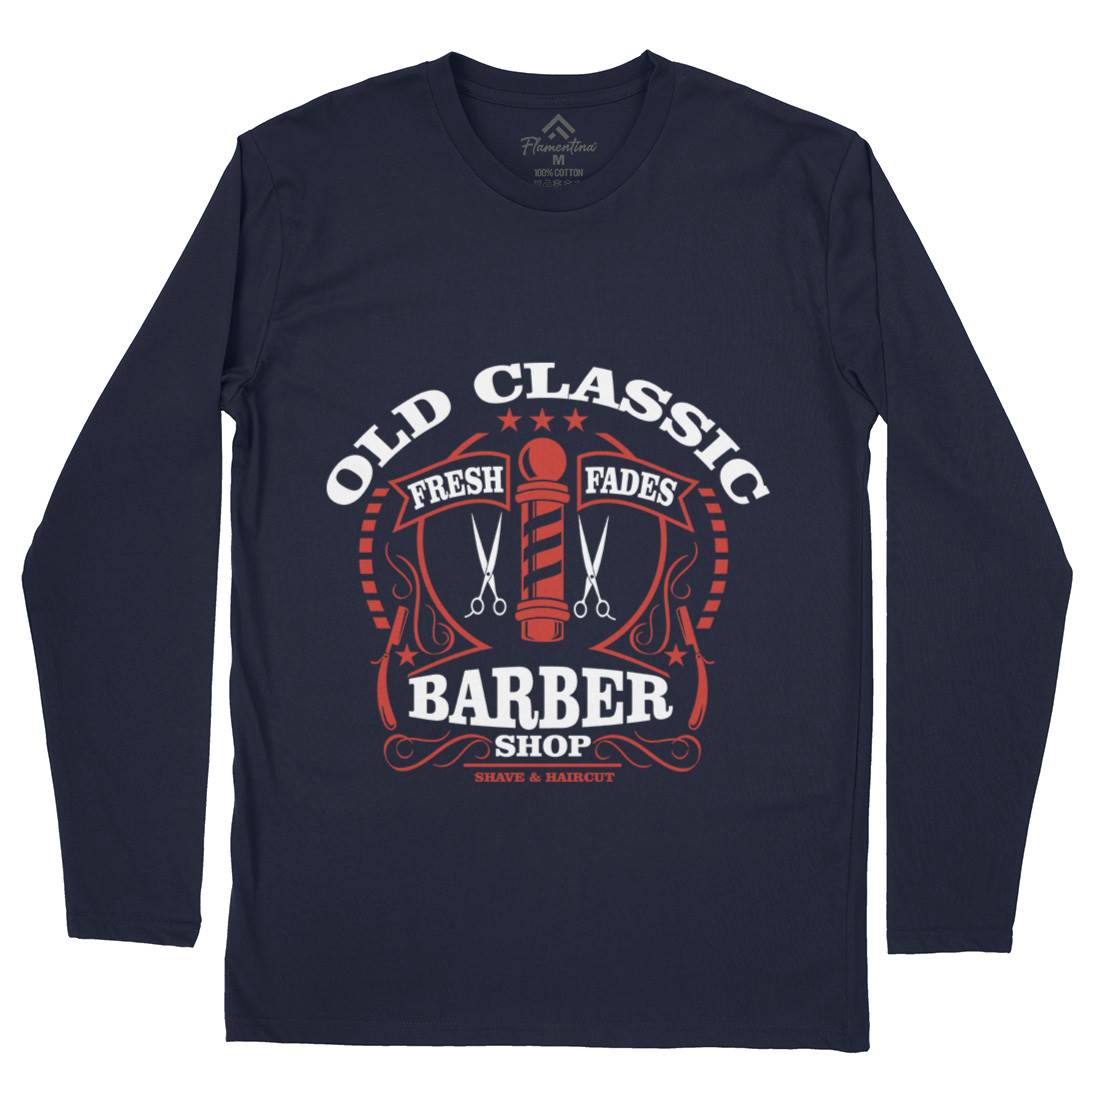 Old Classic Mens Long Sleeve T-Shirt Barber A099